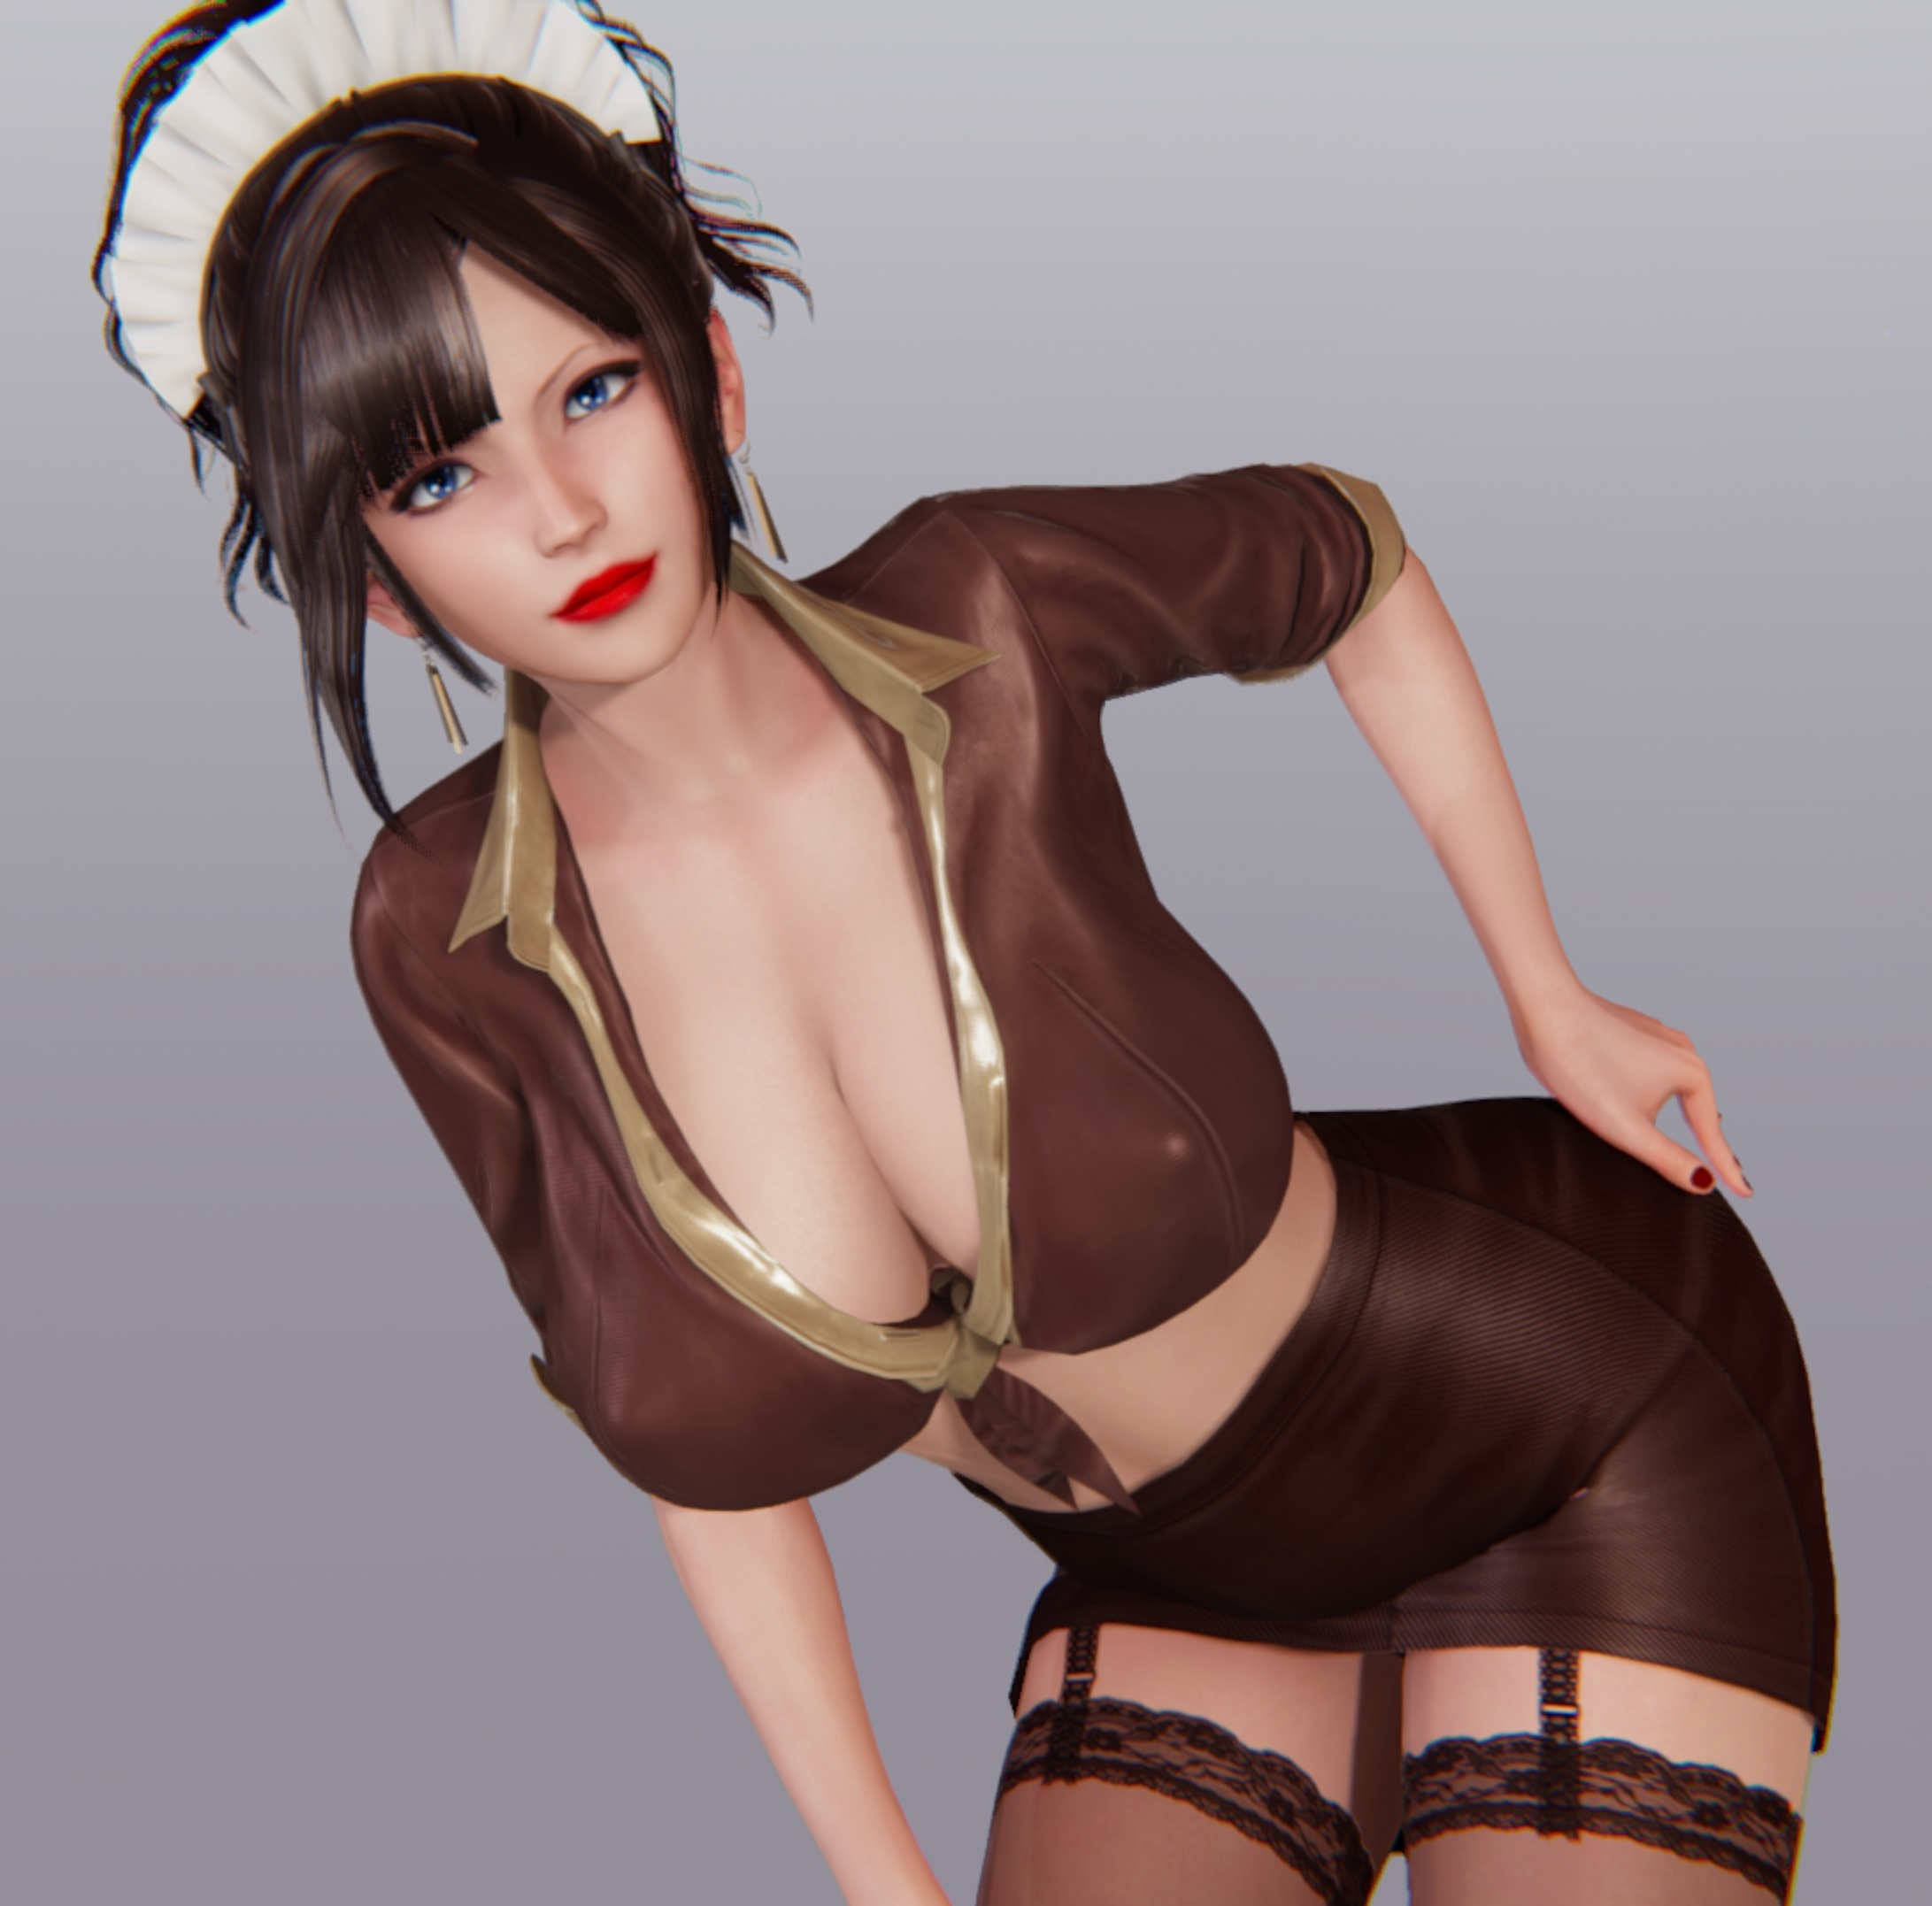 Here my first Honey Select 2 girl, hope you like it too.